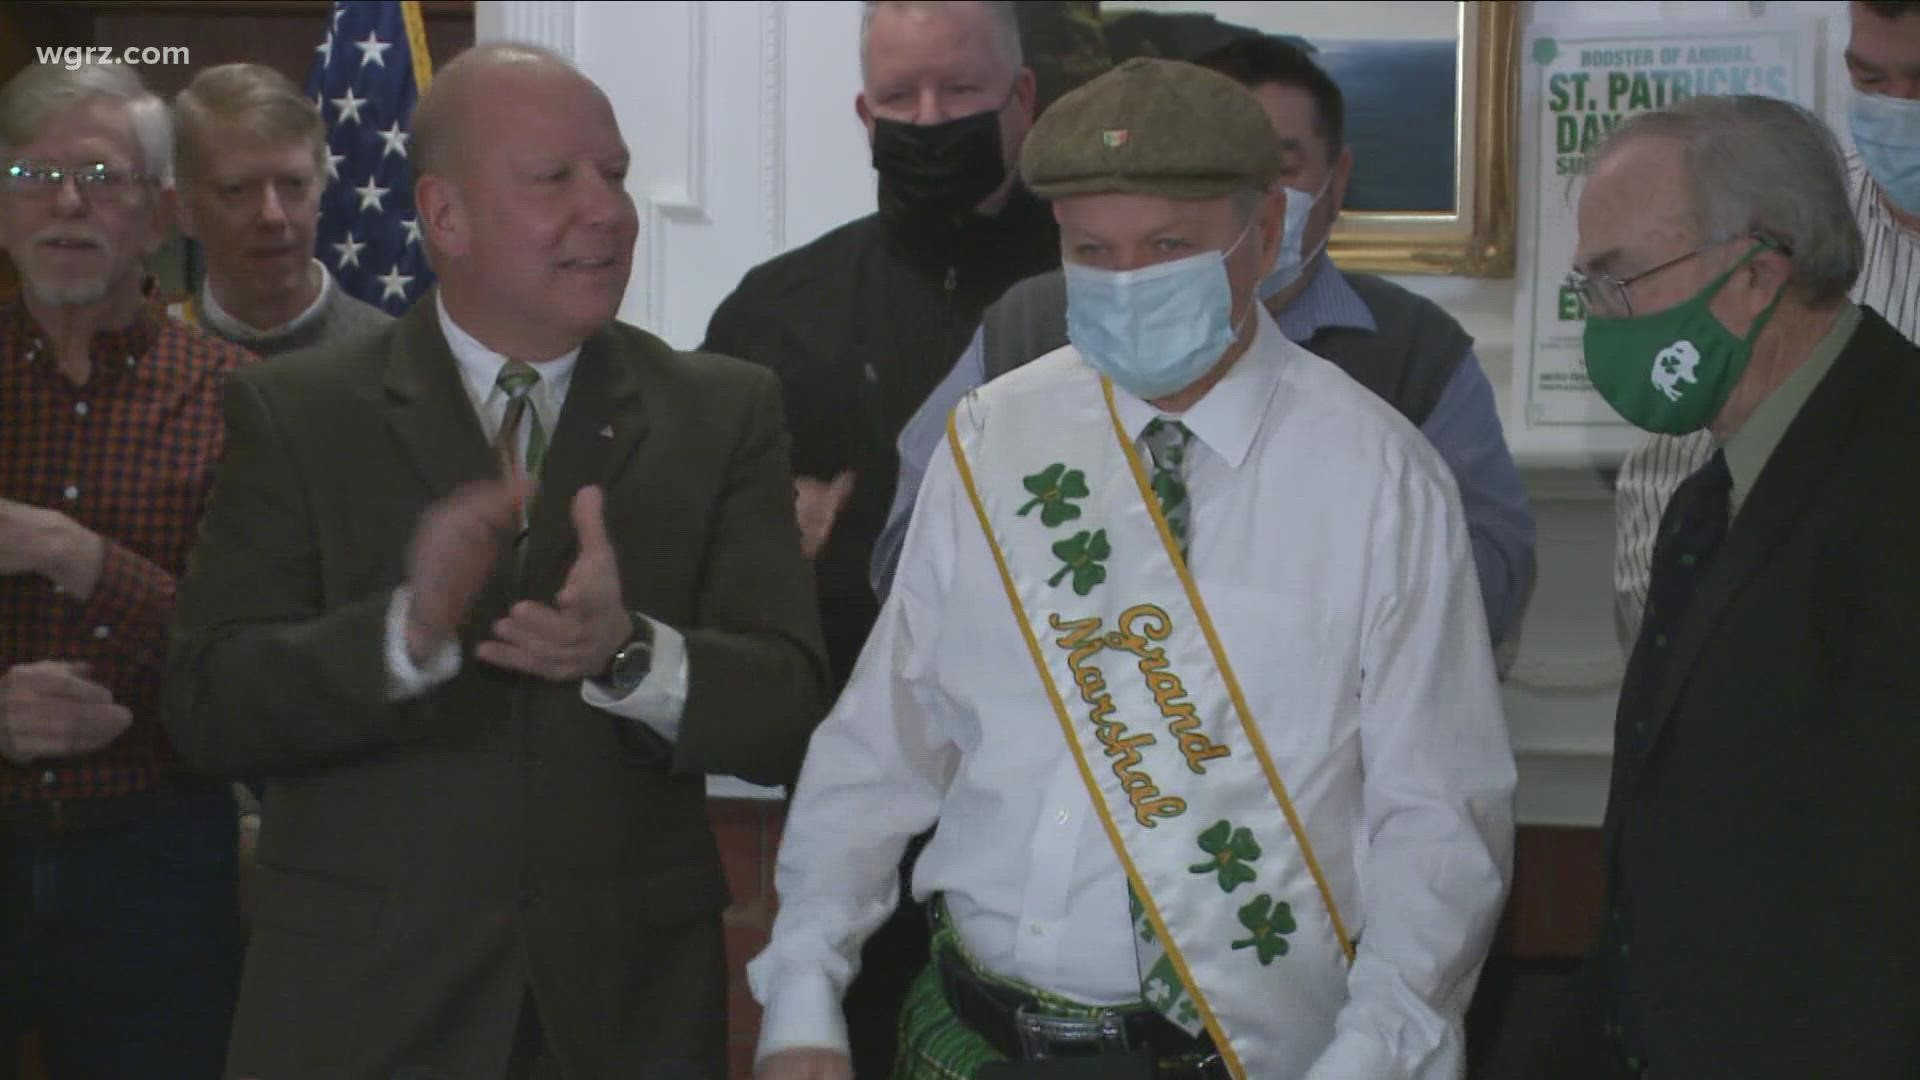 The United Irish American Association re-introduced their grand marshal, Patrick McGuinness.